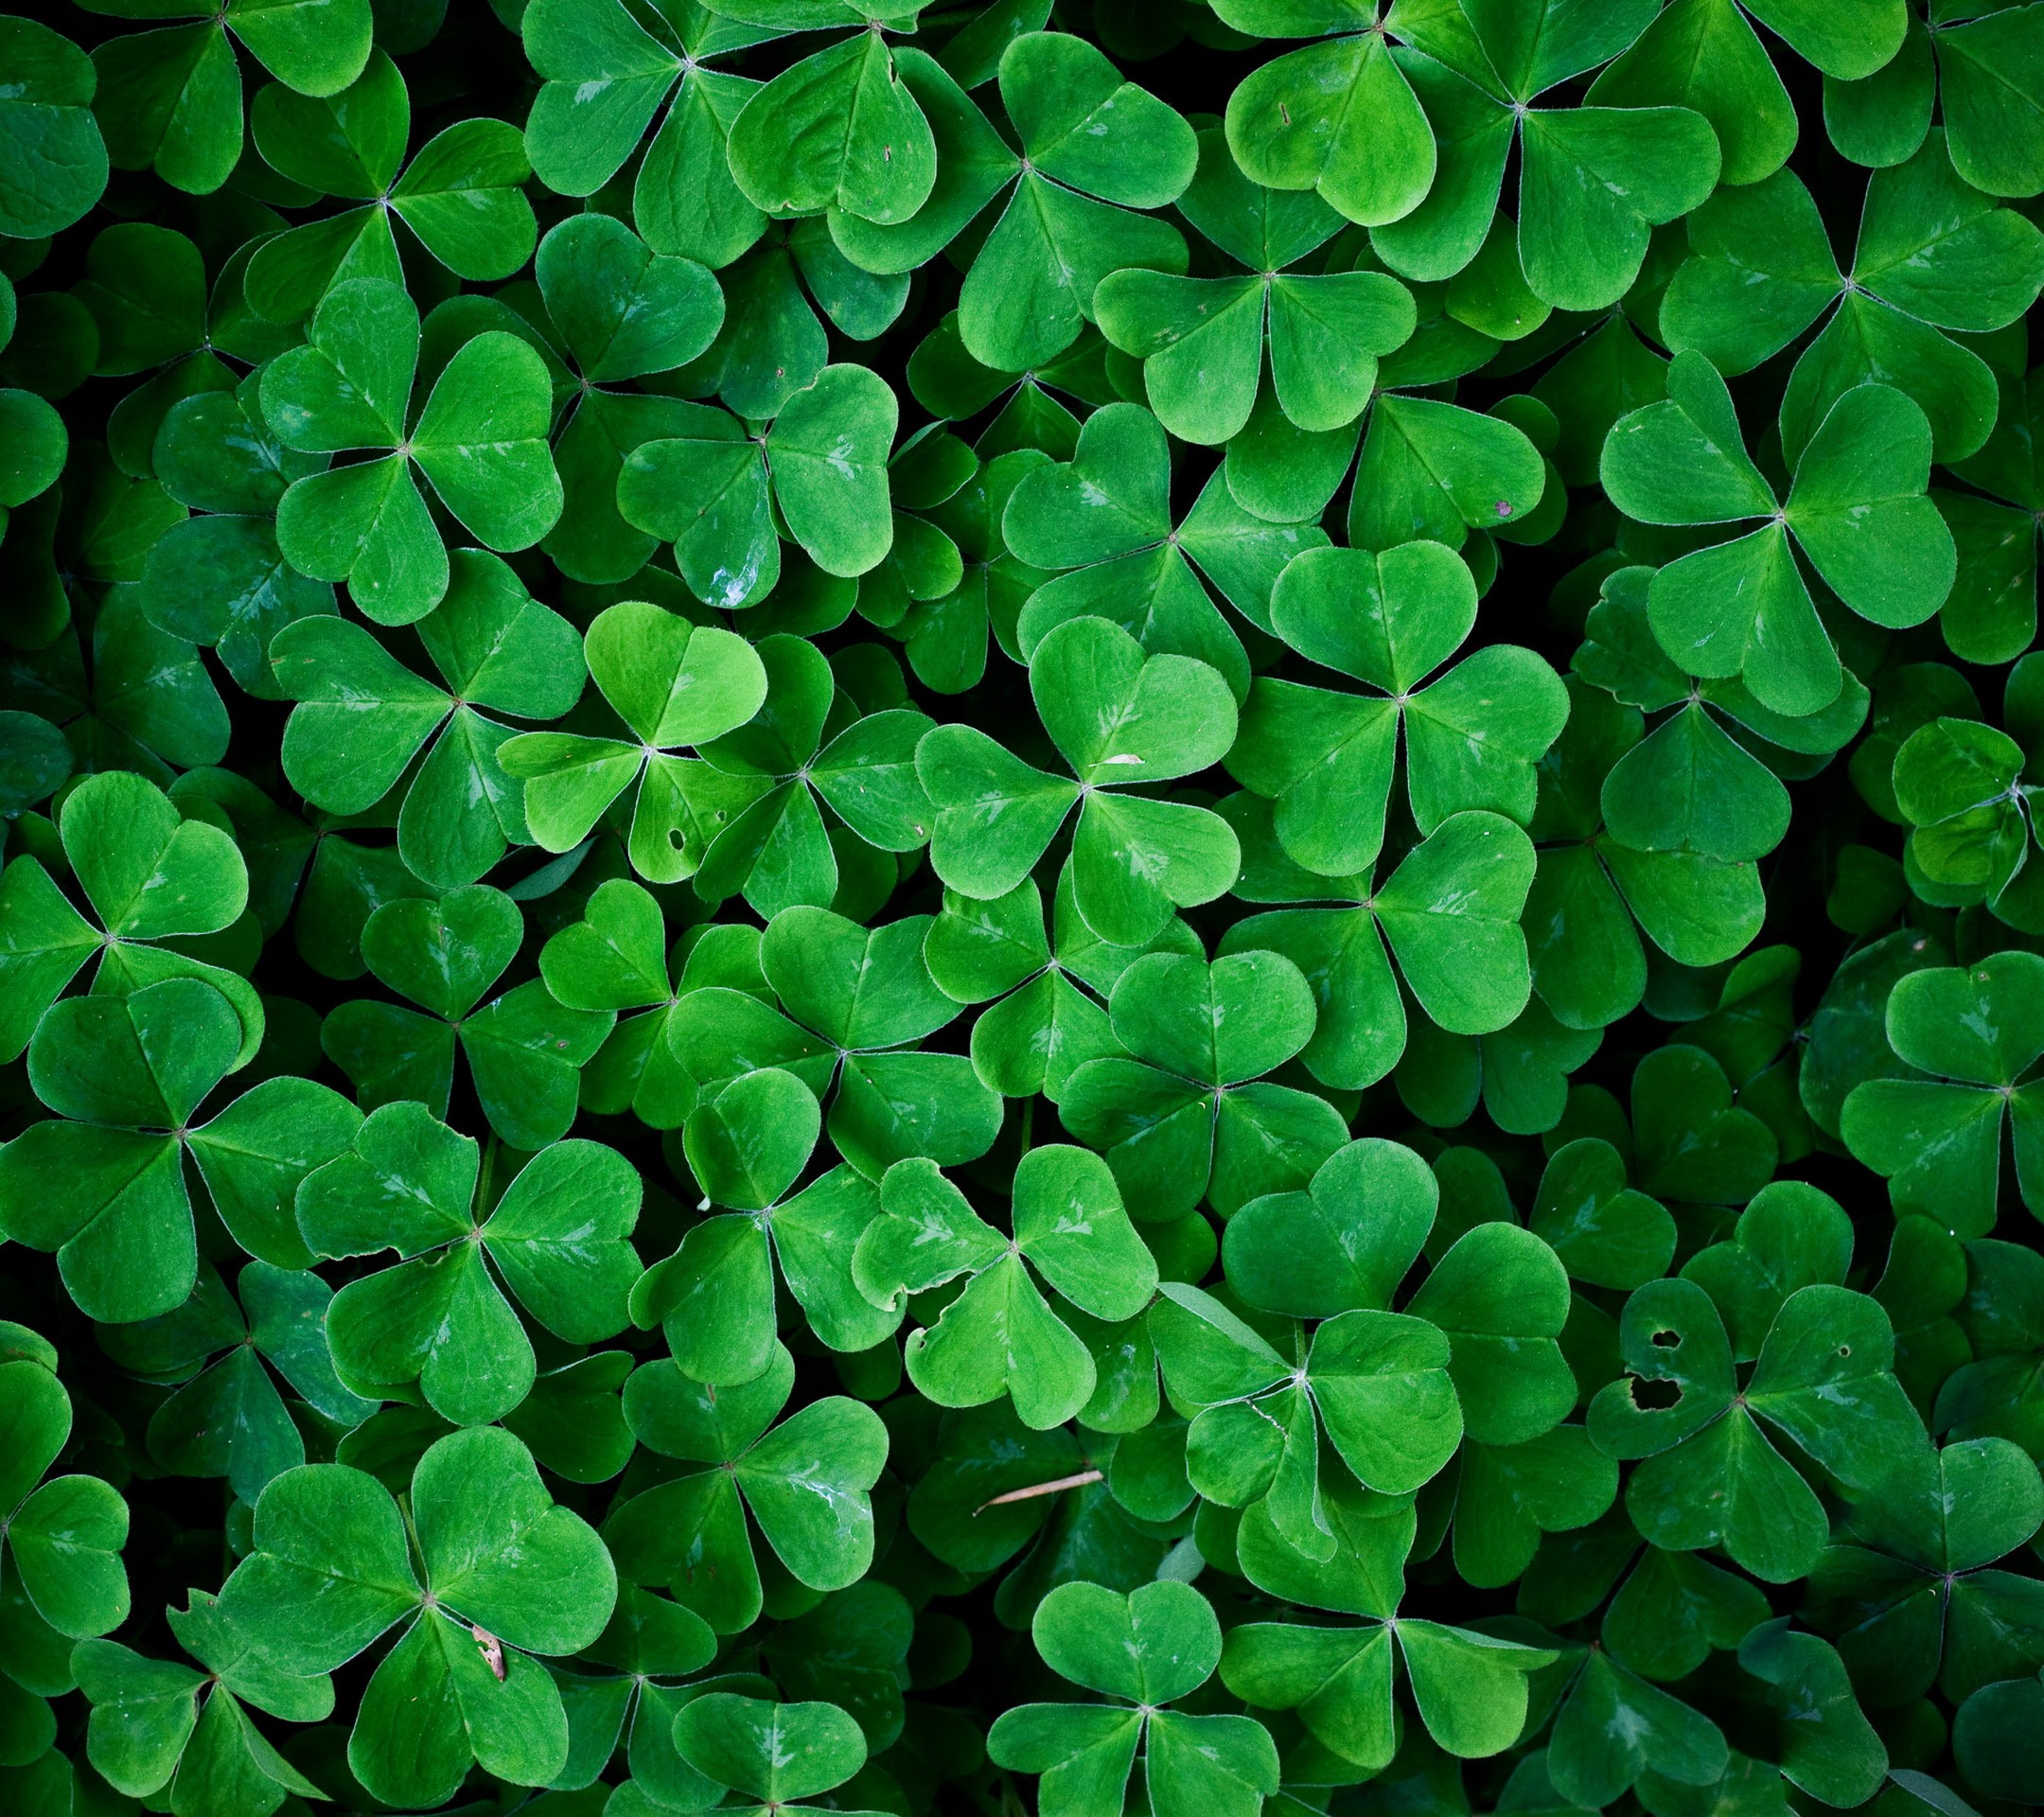 General 2160x1920 leaves plants nature cropped green clovers